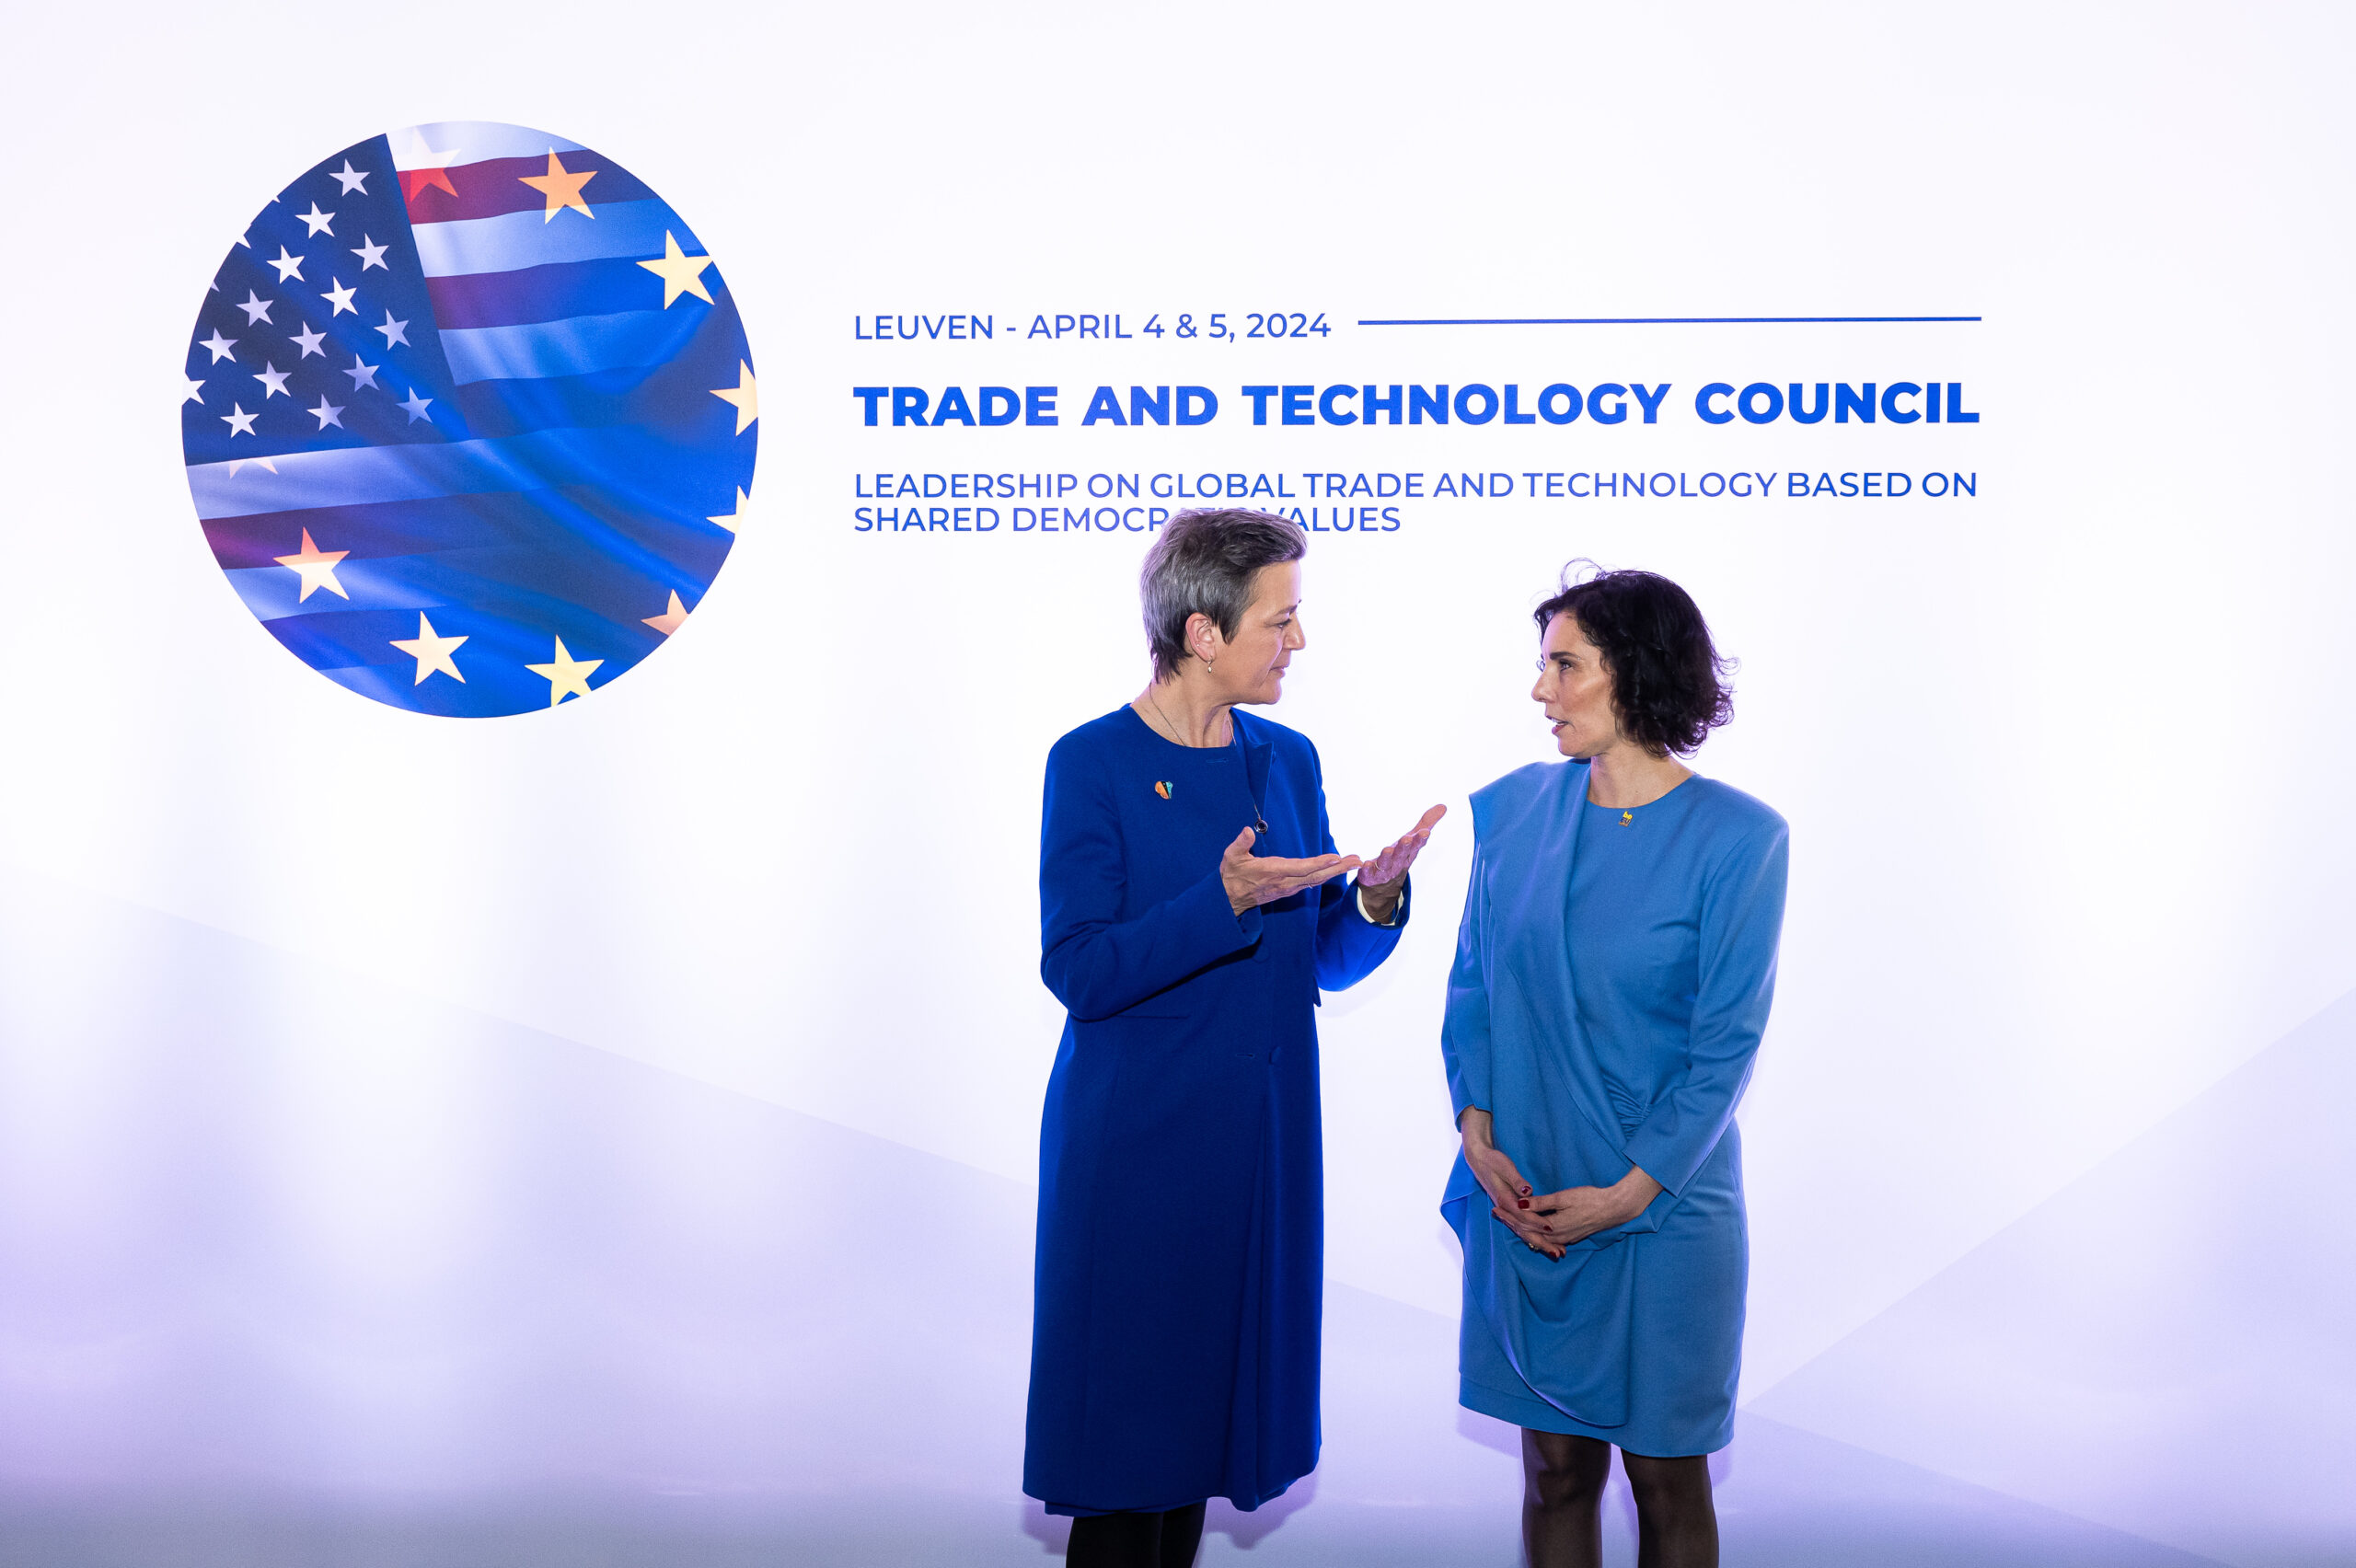 What’s the status of EU-US trade and technology cooperation?